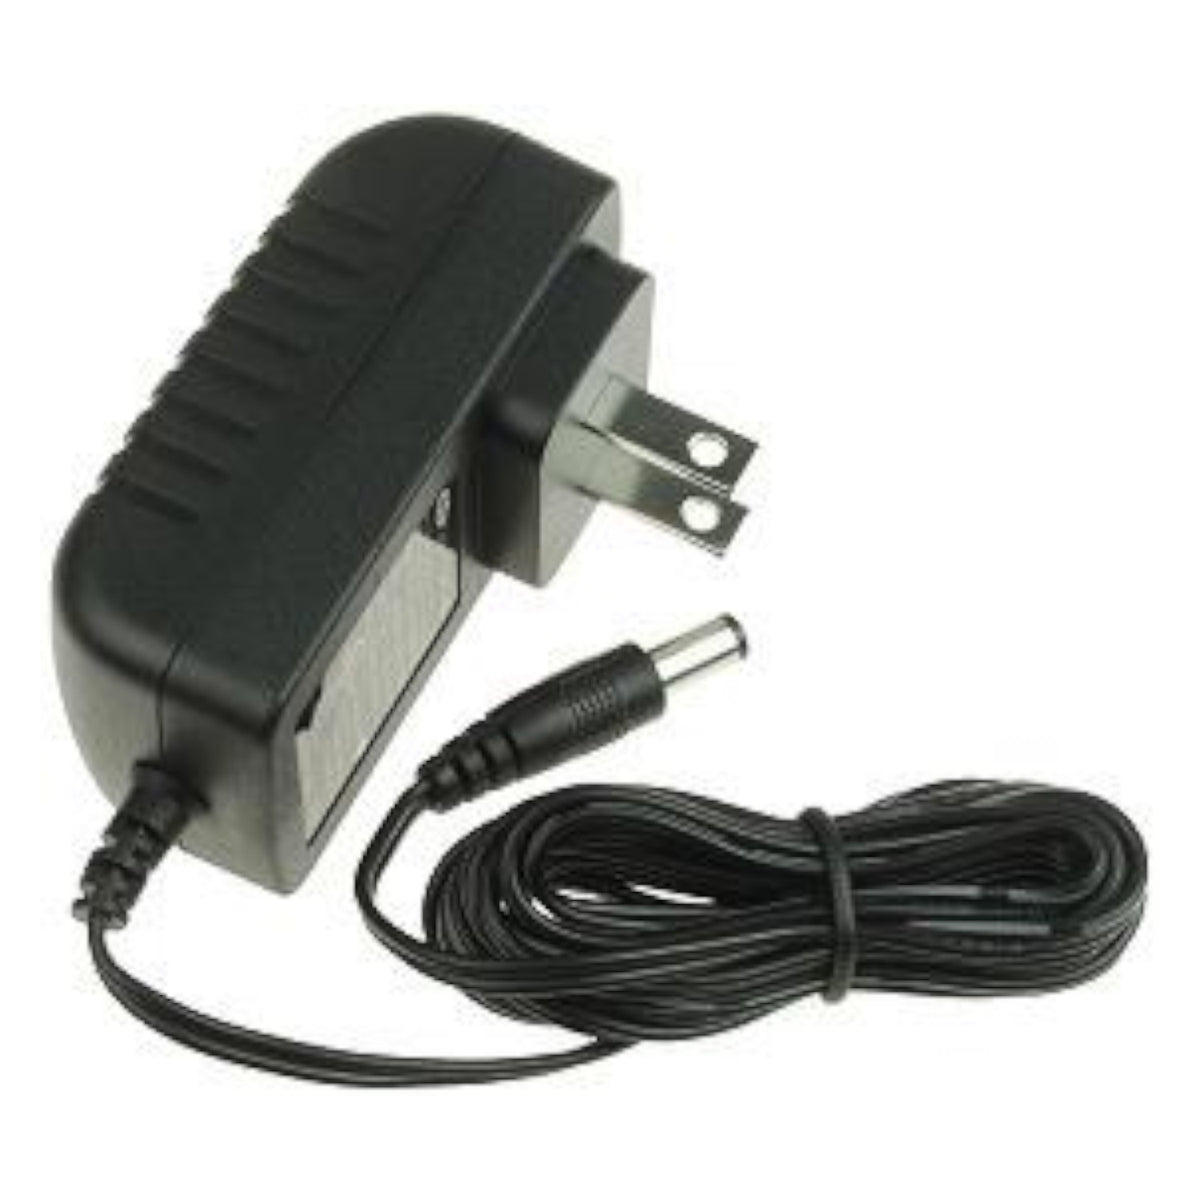 (17-144-4) Pro Plus Charger